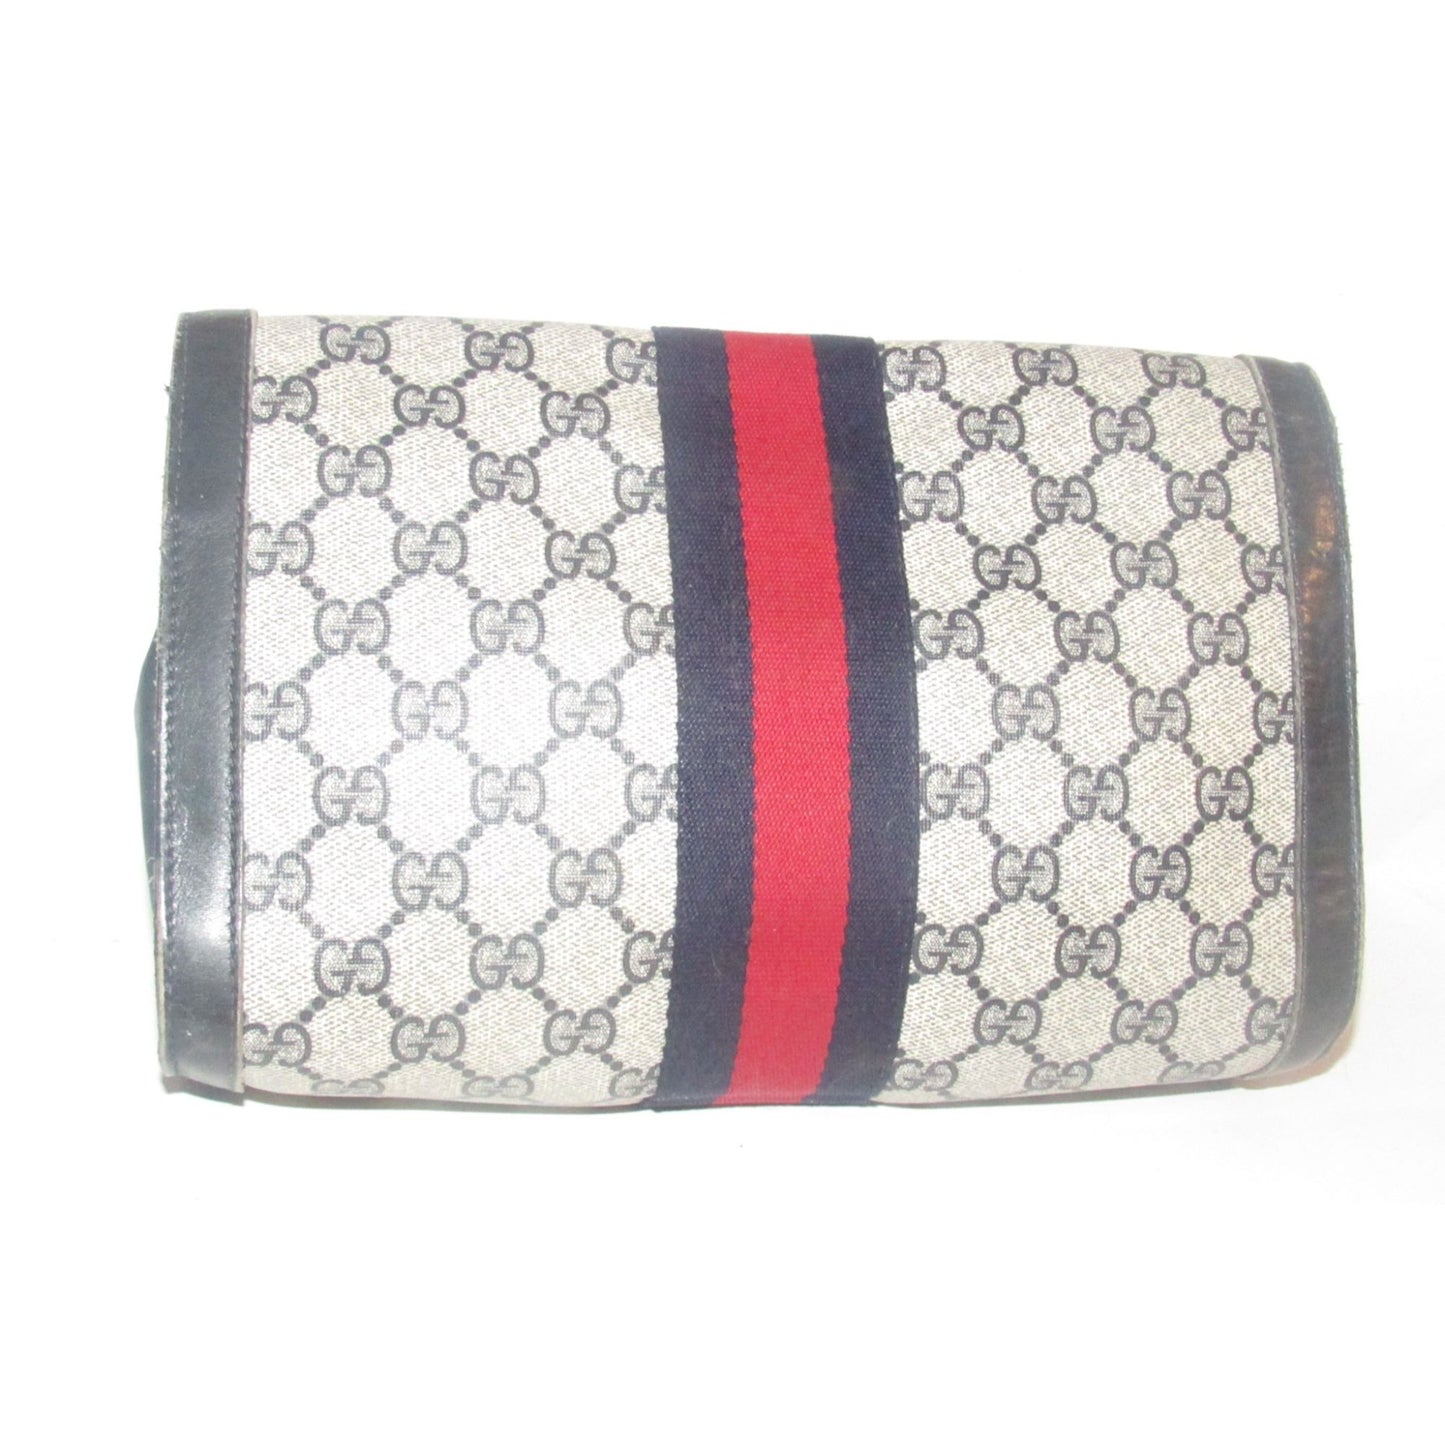 Gucci, navy Guccissima print coated canvas & leather, clutch or cosmetic bag with a red & blue Sherry striped center and envelope top